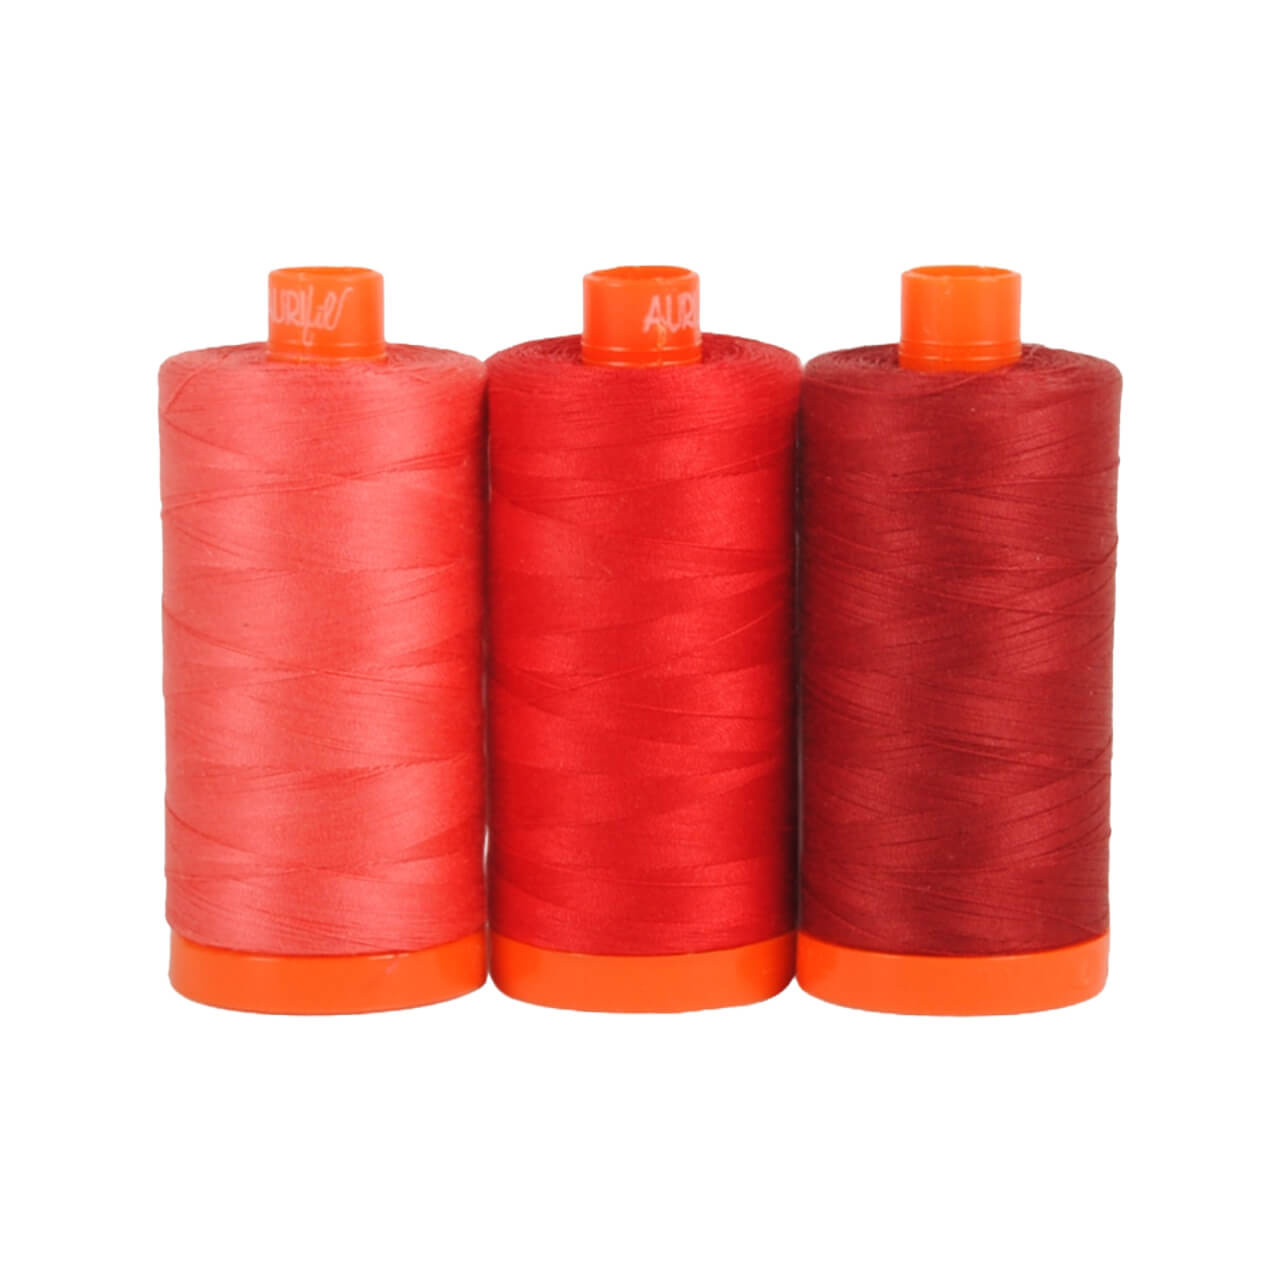 Three spools of Aurifil Pompeii 50wt Egyptian cotton thread in vibrant shades of red on a white background.